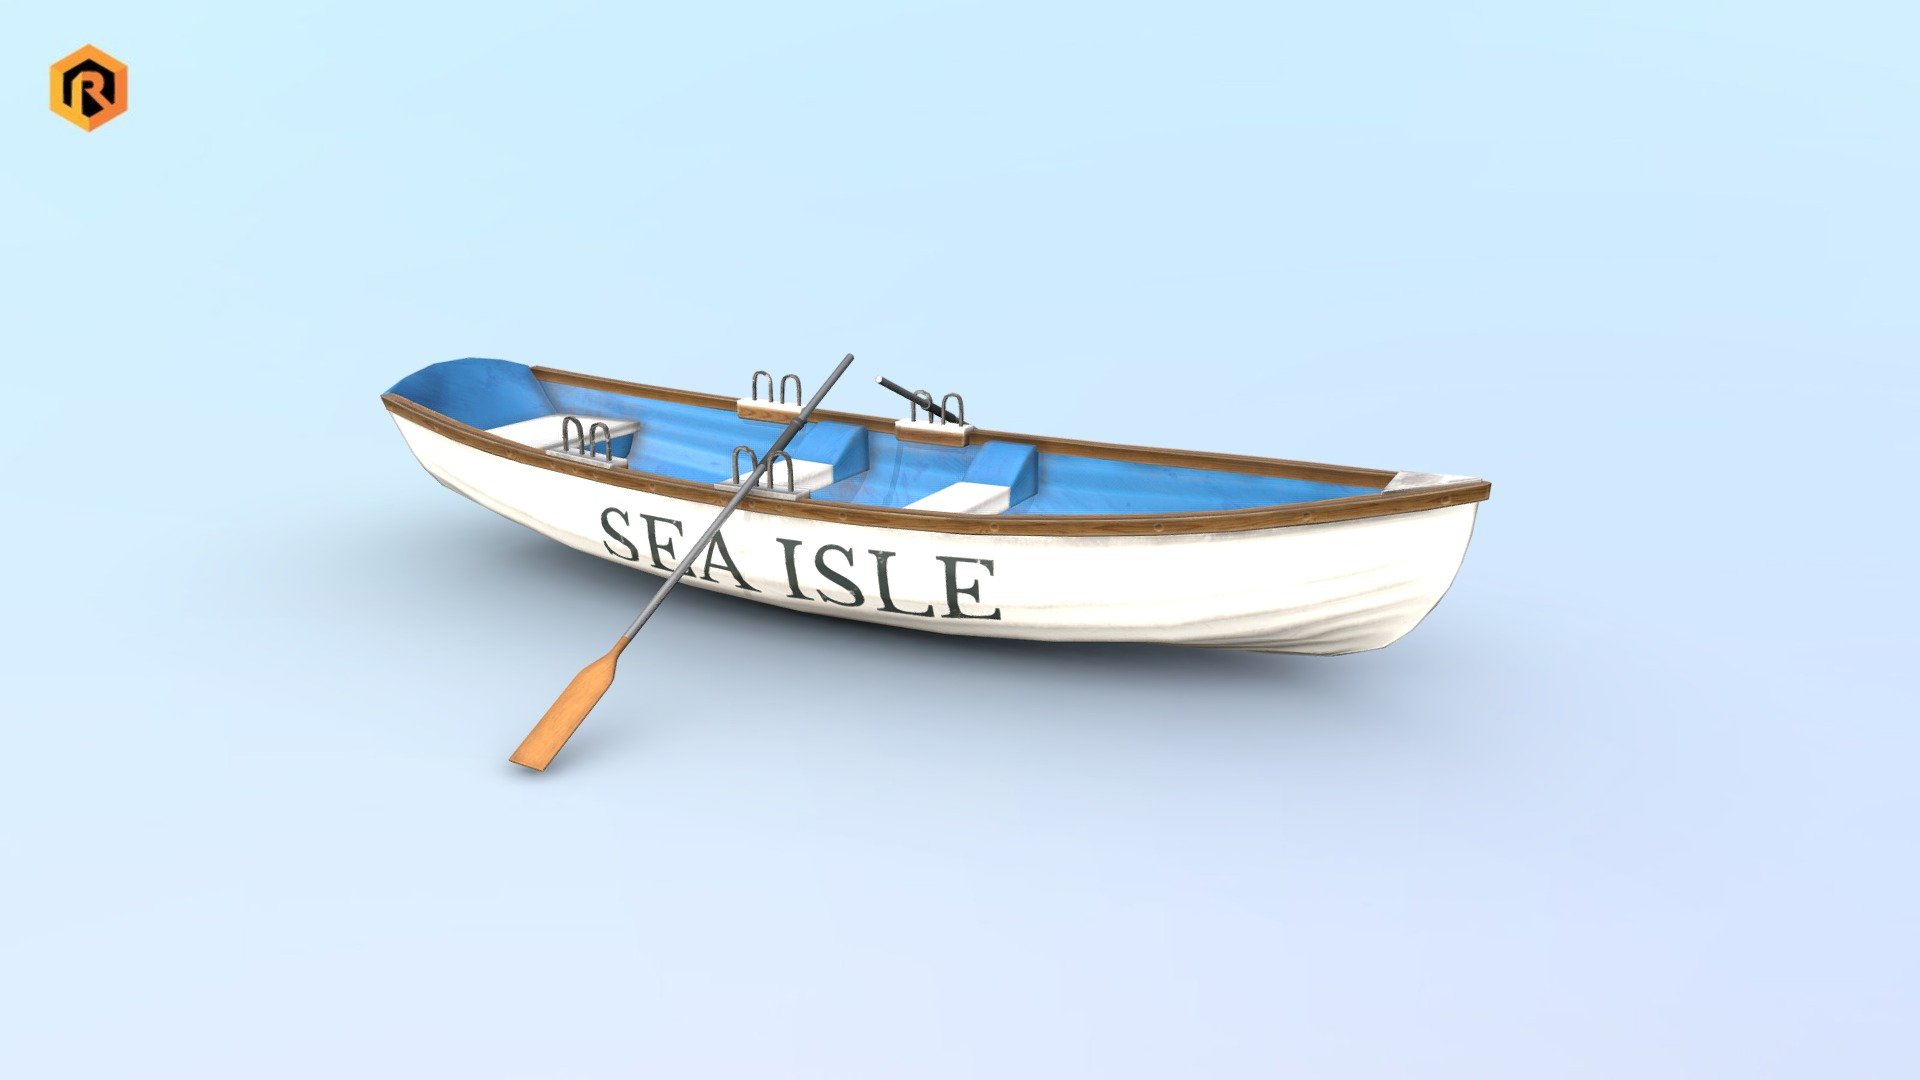 Low-poly PBR 3D model of Rescue Boat With Oars.
This 3D model is best for use in games and other VR / AR, real-time applications such as Unity or Unreal Engine.  It can also be rendered in Blender (ex Cycles) or Vray as the model is equipped with all required PBR textures.  

Technical details:




2 PBR textures sets (Main Body and Oar) 

1821 Triangles

1763 Vertices

The model is divided into few objects (Main Body and Oars)

Lot of additional file formats included (Blender, Unity, Maya etc.)  

More file formats are available in additional zip file on product page.

Please feel free to contact me if you have any questions or need any support for this asset.

Support e-mail: support@rescue3d.com - Rescue Boat With Oars - Buy Royalty Free 3D model by Rescue3D Assets (@rescue3d) 3d model